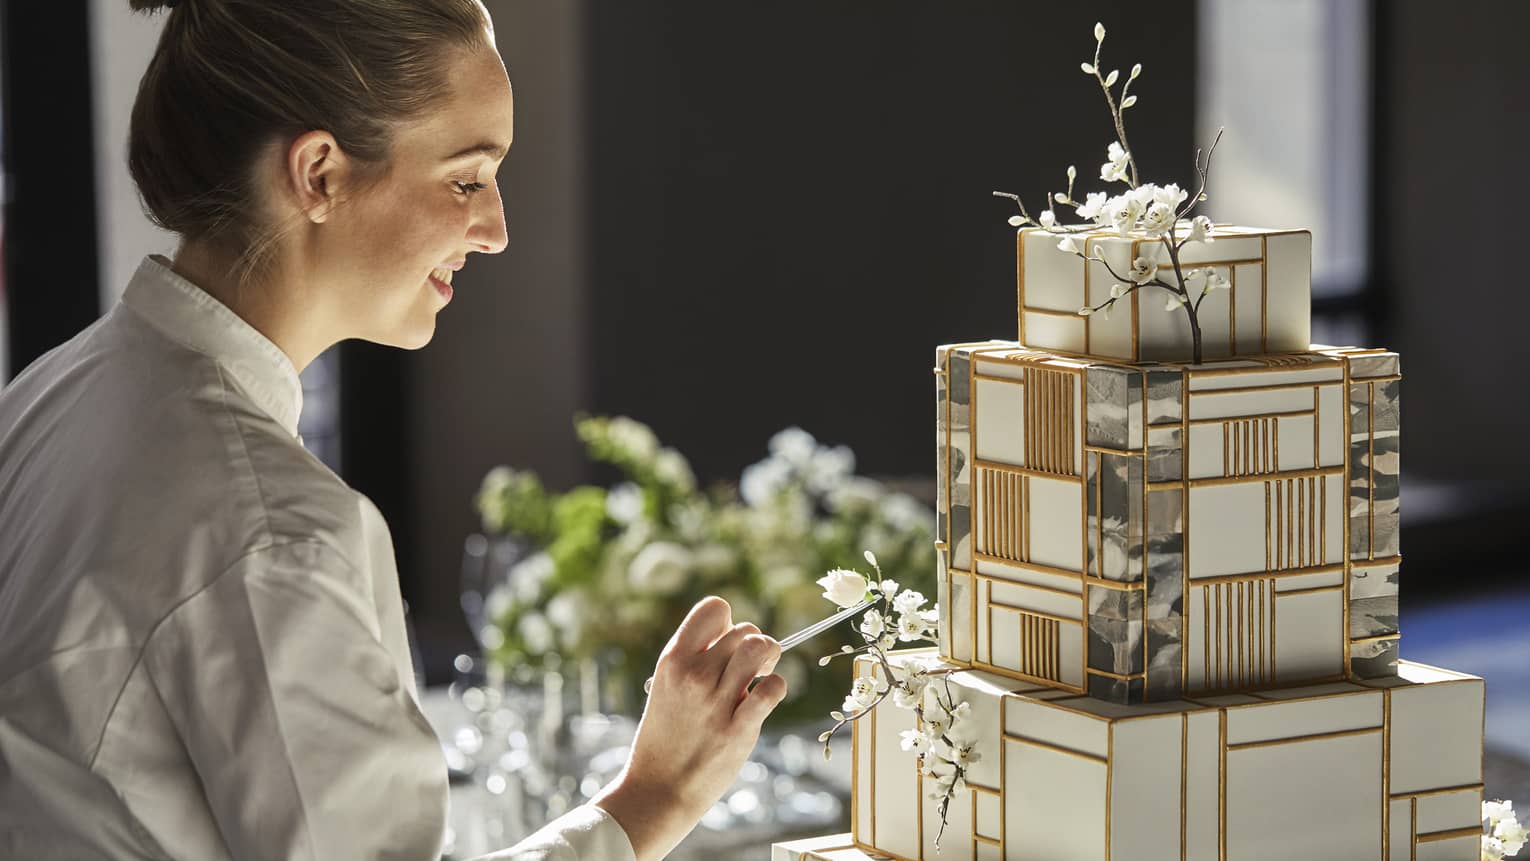 Pastry chef decorates elaborate tiered cake with gold accents